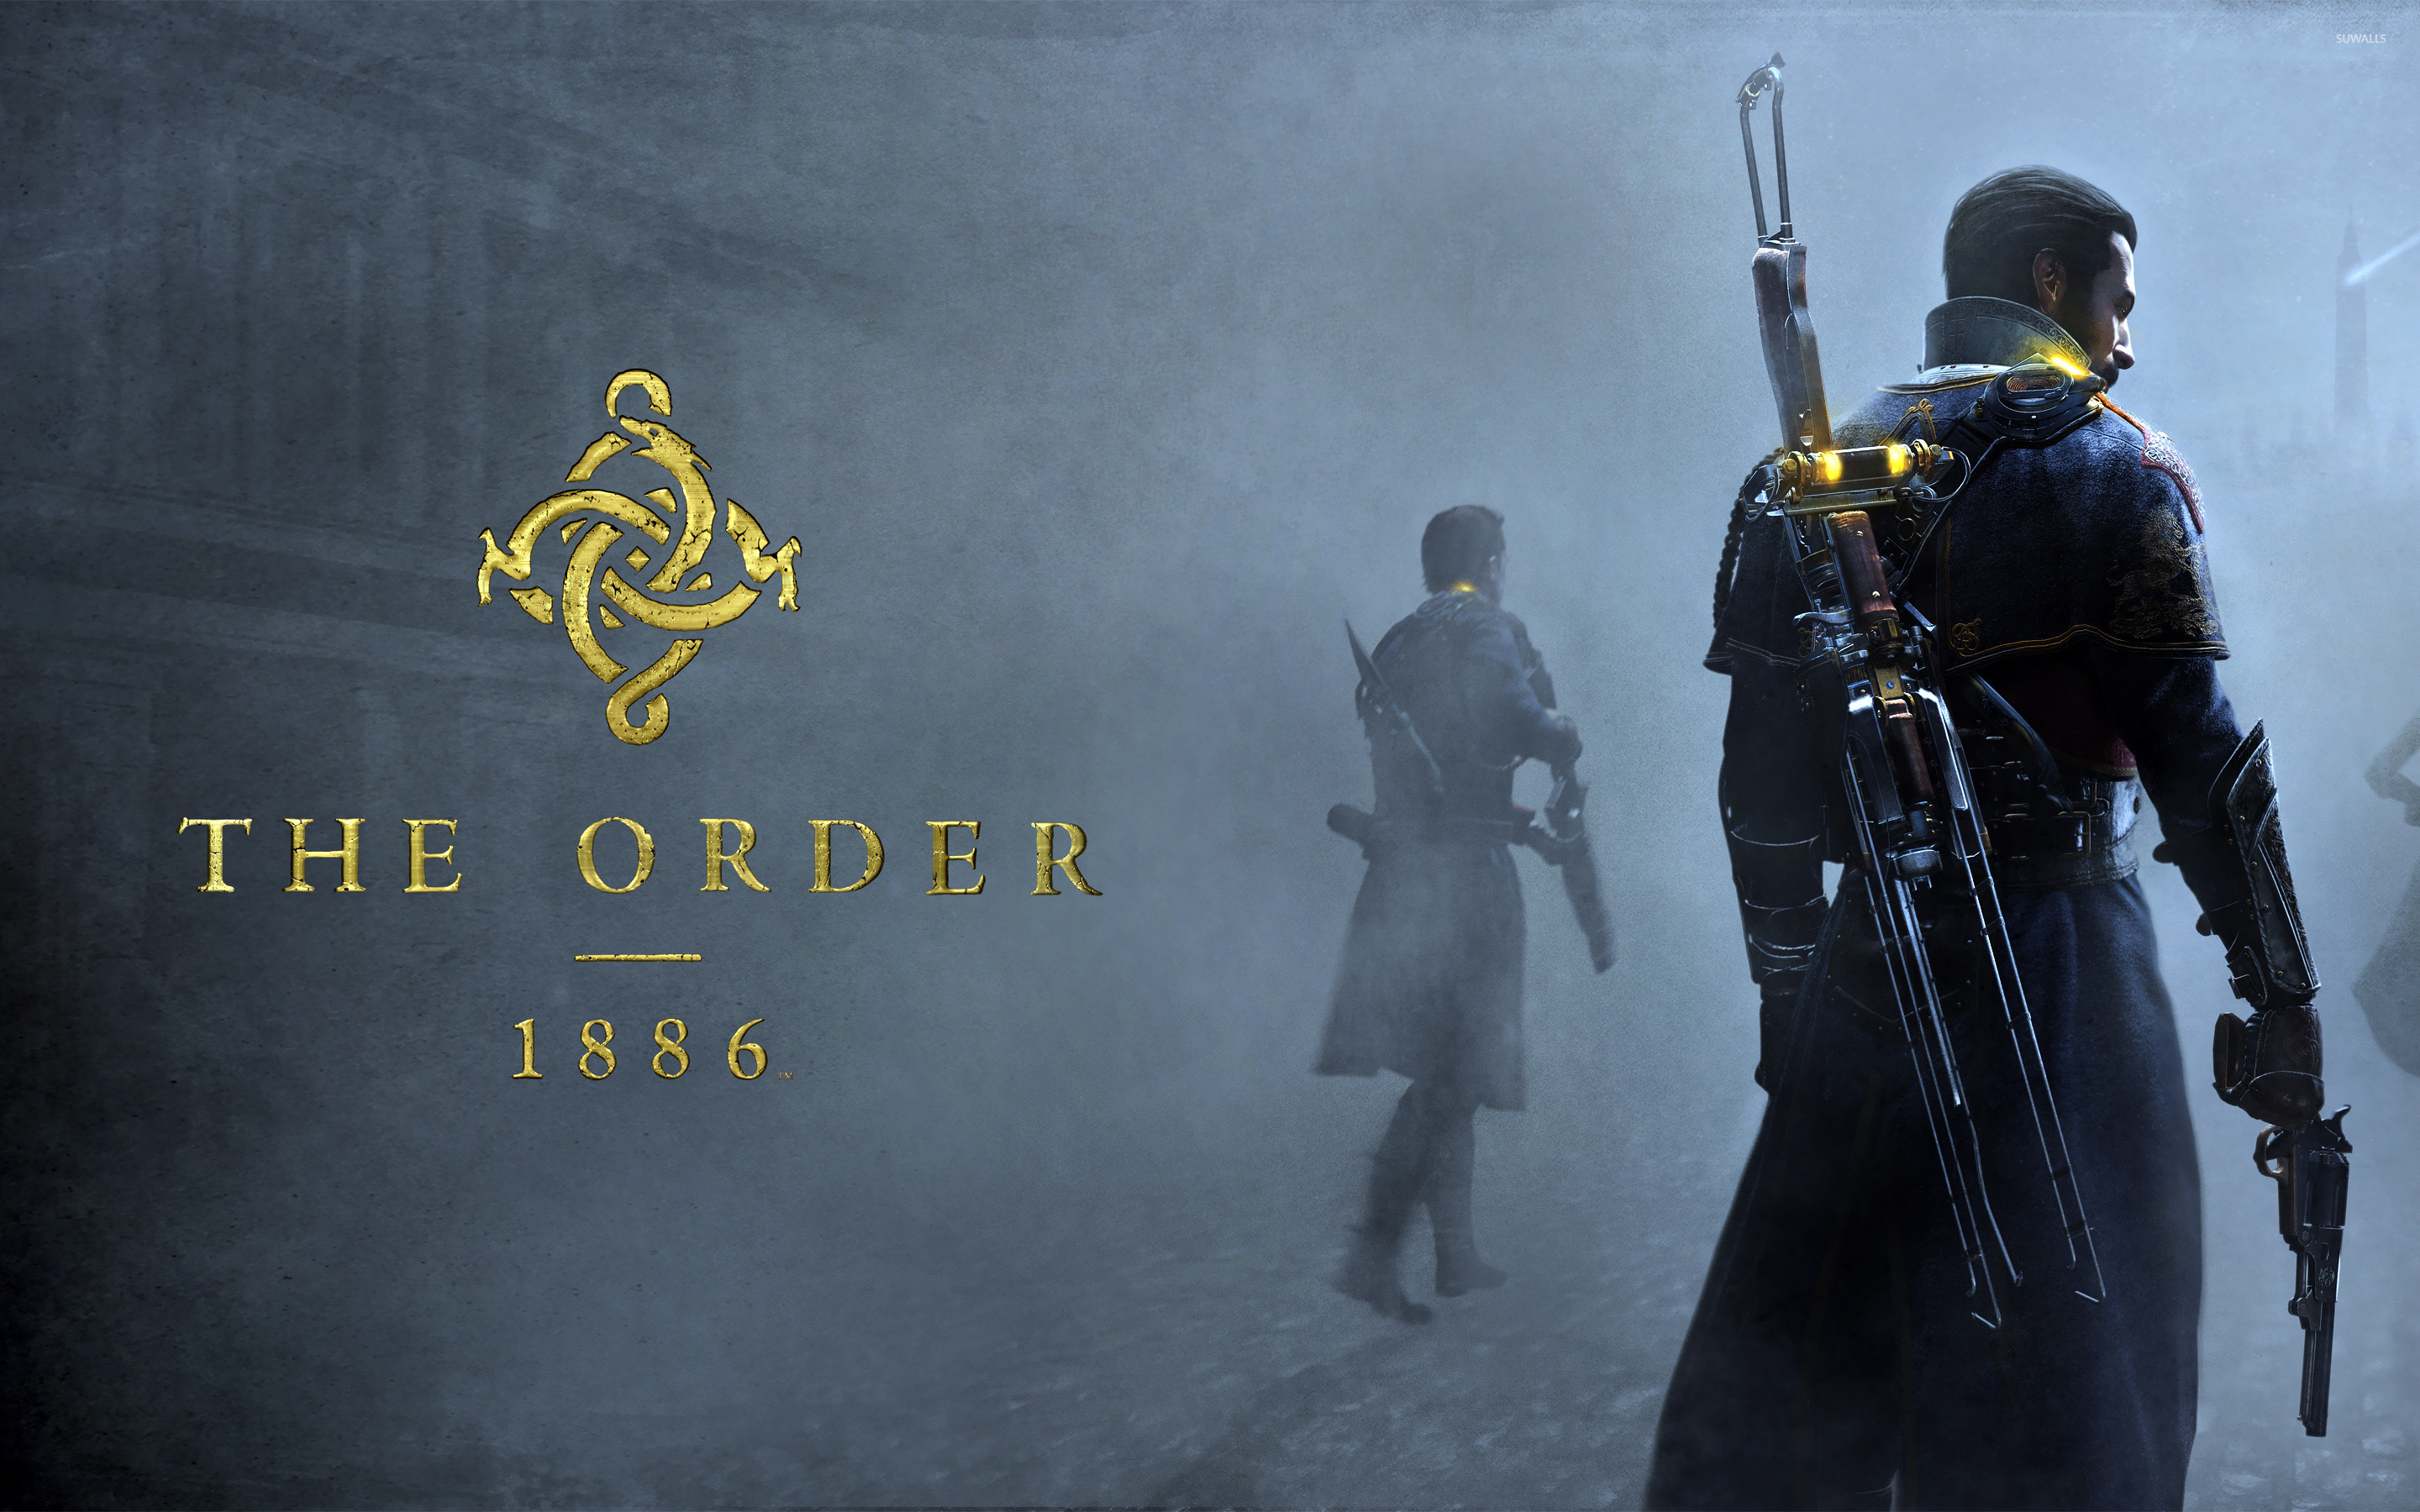 The Order Wallpaper Game